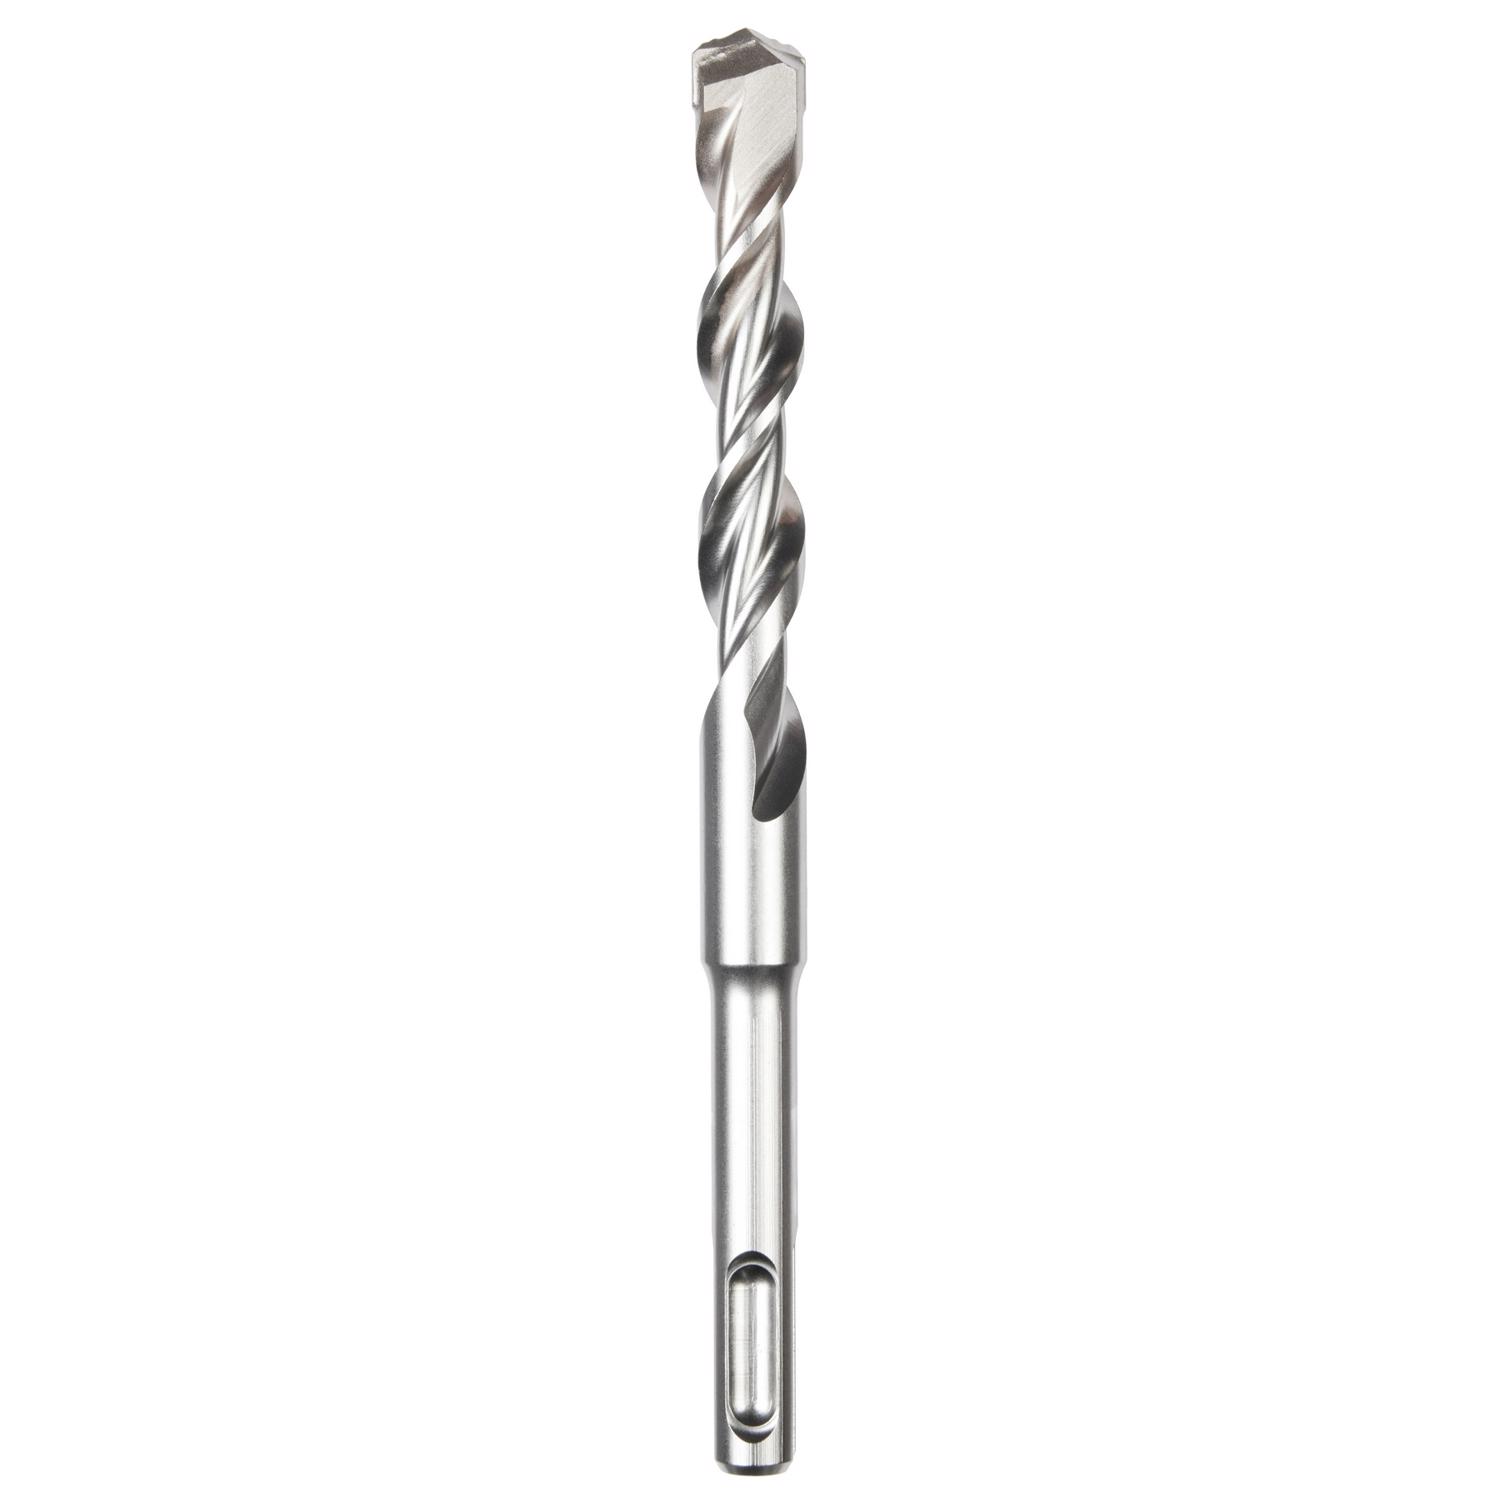 Drill Bits: Metal, Concrete & Wood Drill Bits at Ace Hardware